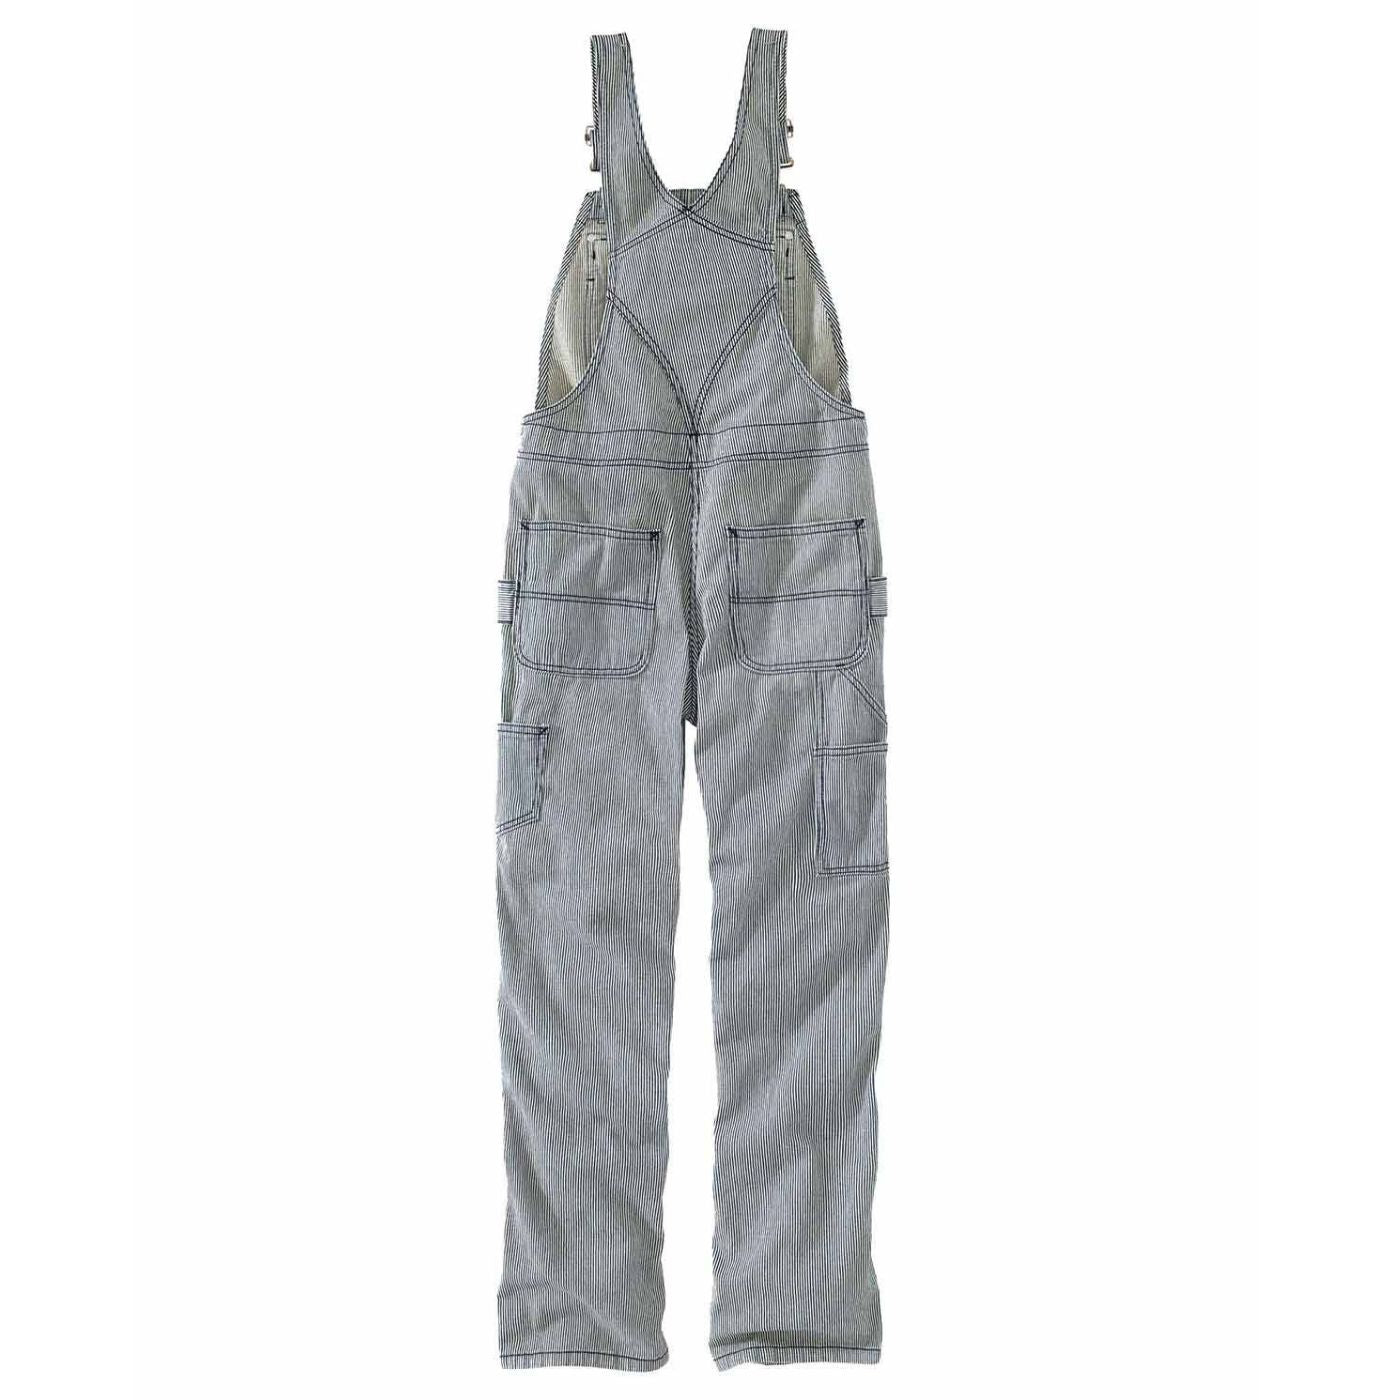 Jeans Stripped Carhartt Overalls